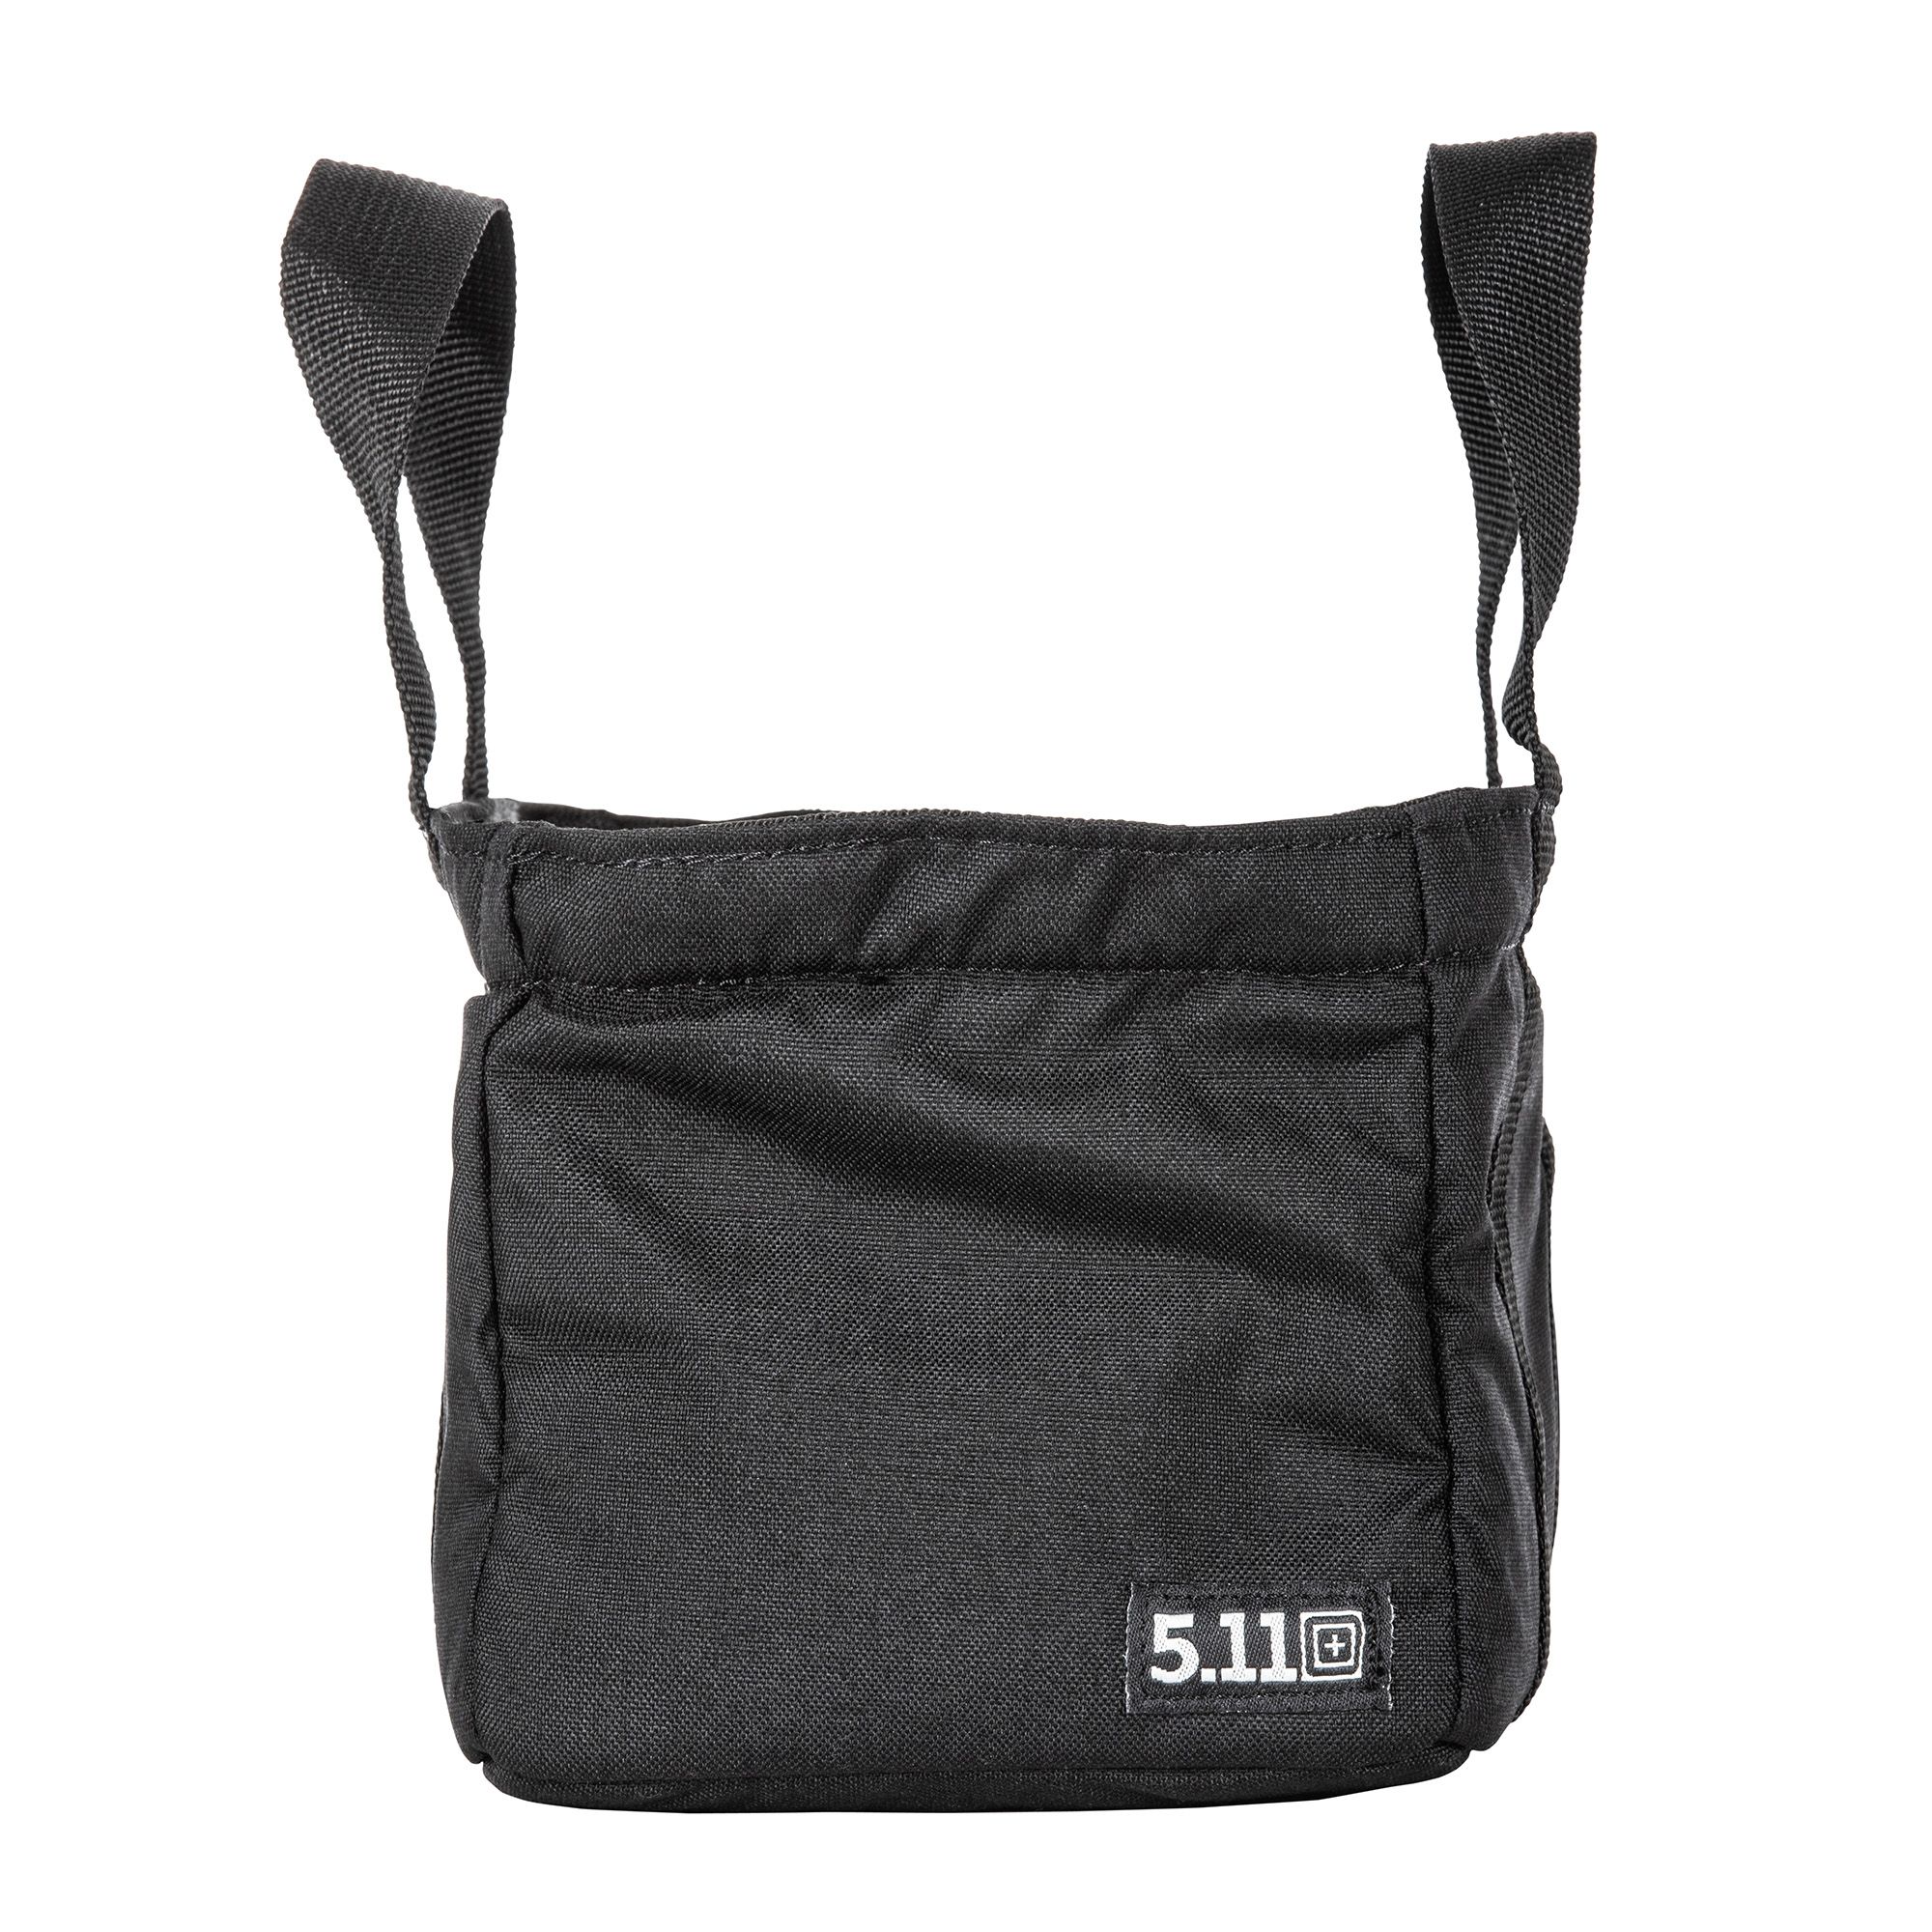 5.11 Range Master Padded Pouch